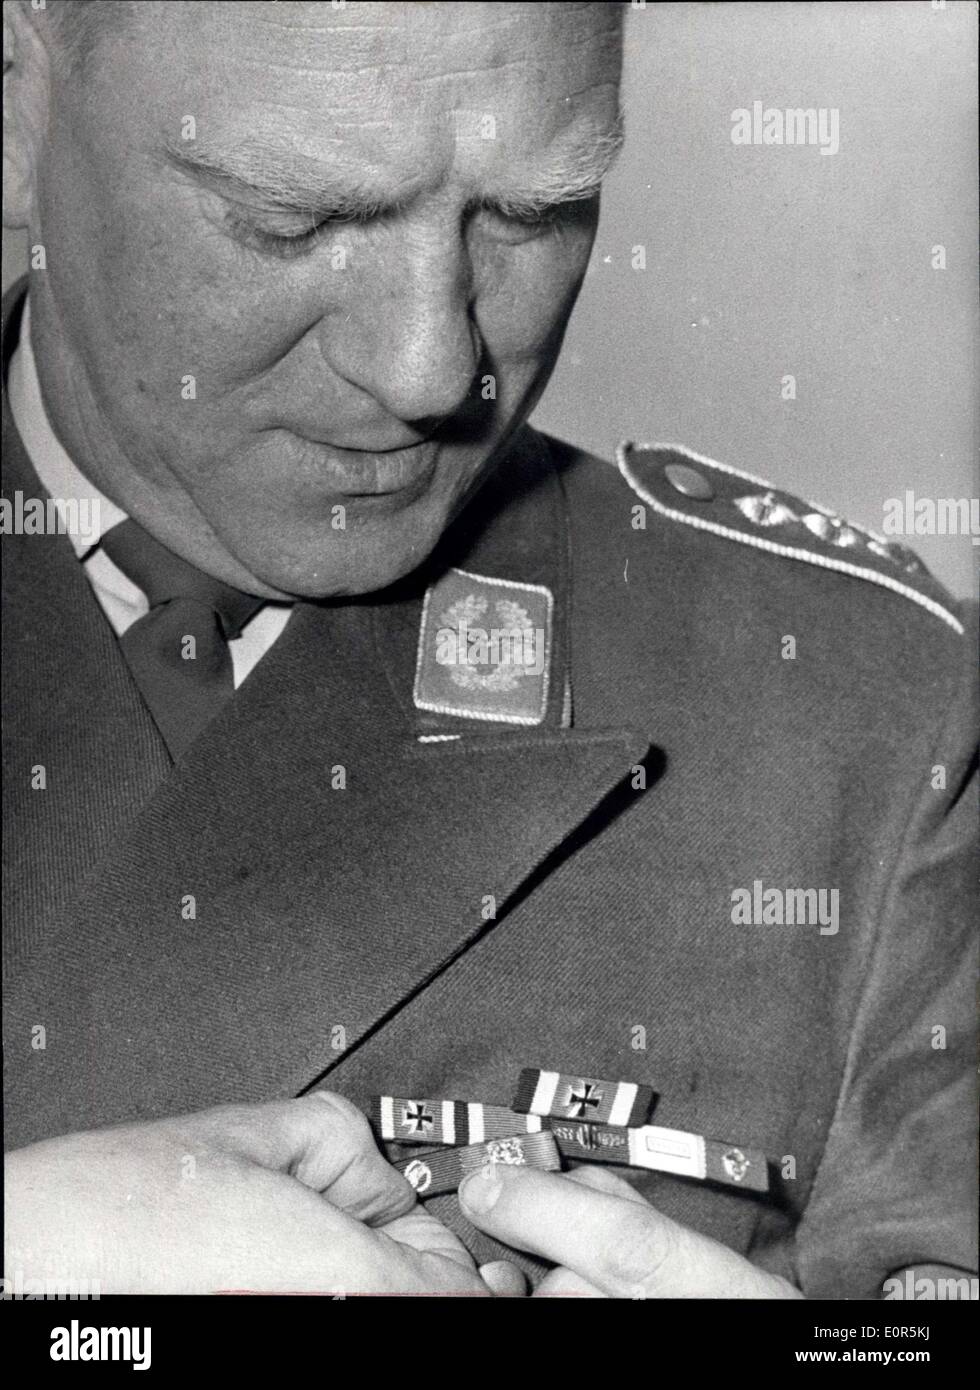 Apr. 01, 1958 - The decorations may be worn again: Since April 1, 1958 the soldiers of the Federal soldiers may wear again their decorations from the last war. When on duty or off duty only the ''Small decoration'' may be worn, the ''Ritterkreuz'' and the E.K.I. (distinguished service Cross I) contrary to former times no more will be worn in the original type. The ''big decoration'' only may be worn in very few cases and also then with the consent of the federal Defence Ministry or the commander of the division Stock Photo